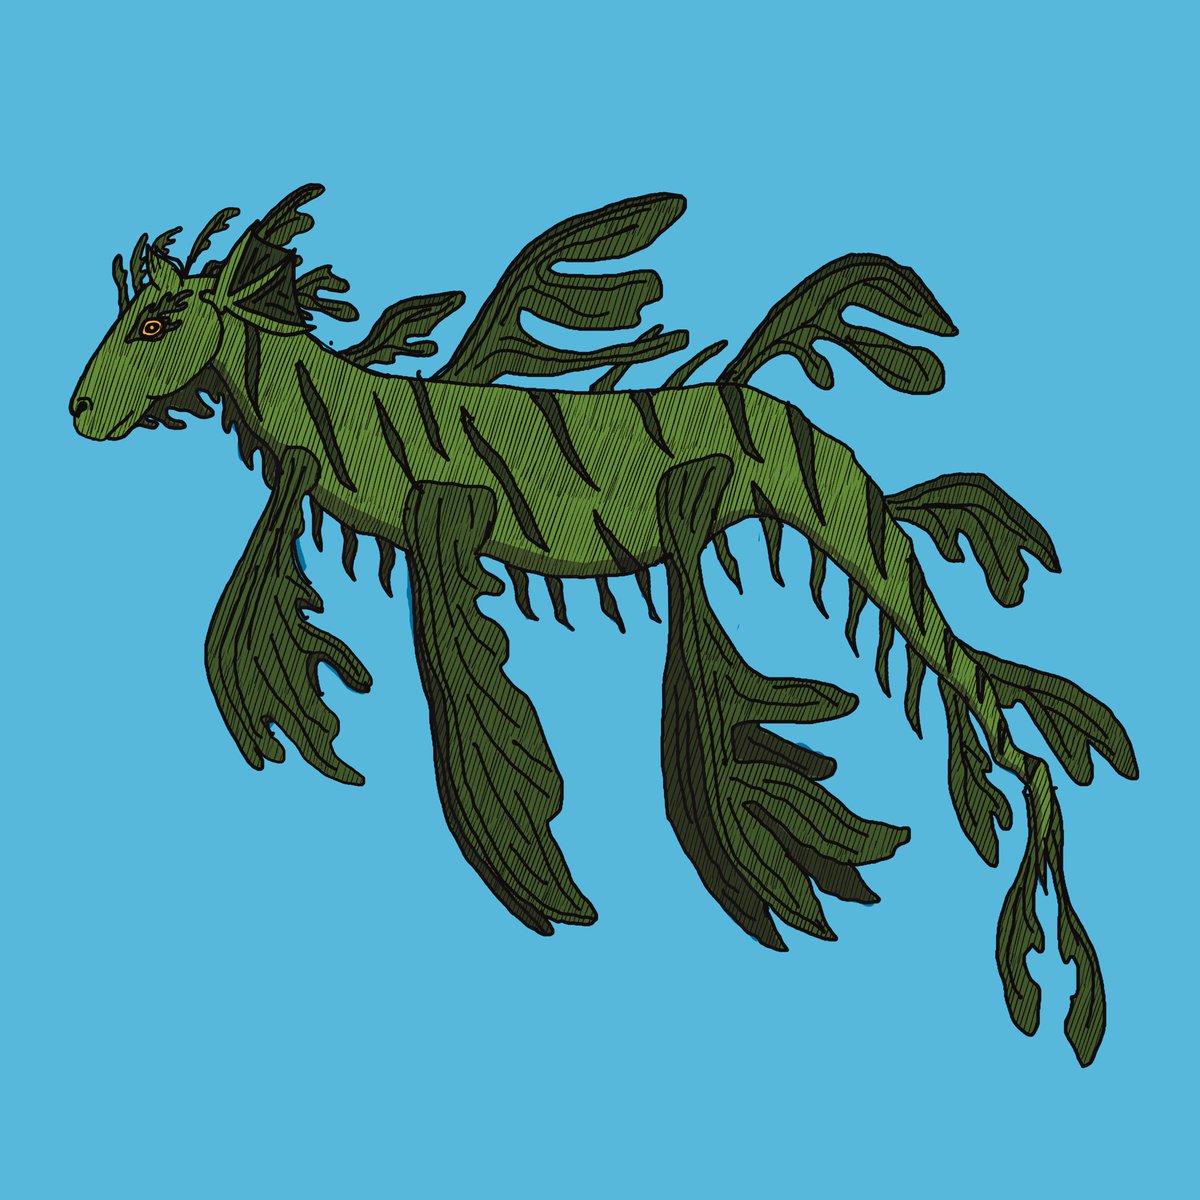 Designed the kelpie for WizardWorld was inspired by leafy seadragons 🐉 

Kelpies are pachyderms that adapted to life in the water millions of years ago. These rare and elusive creatures are not to be approached as their sticky hides will trap you upon touch.